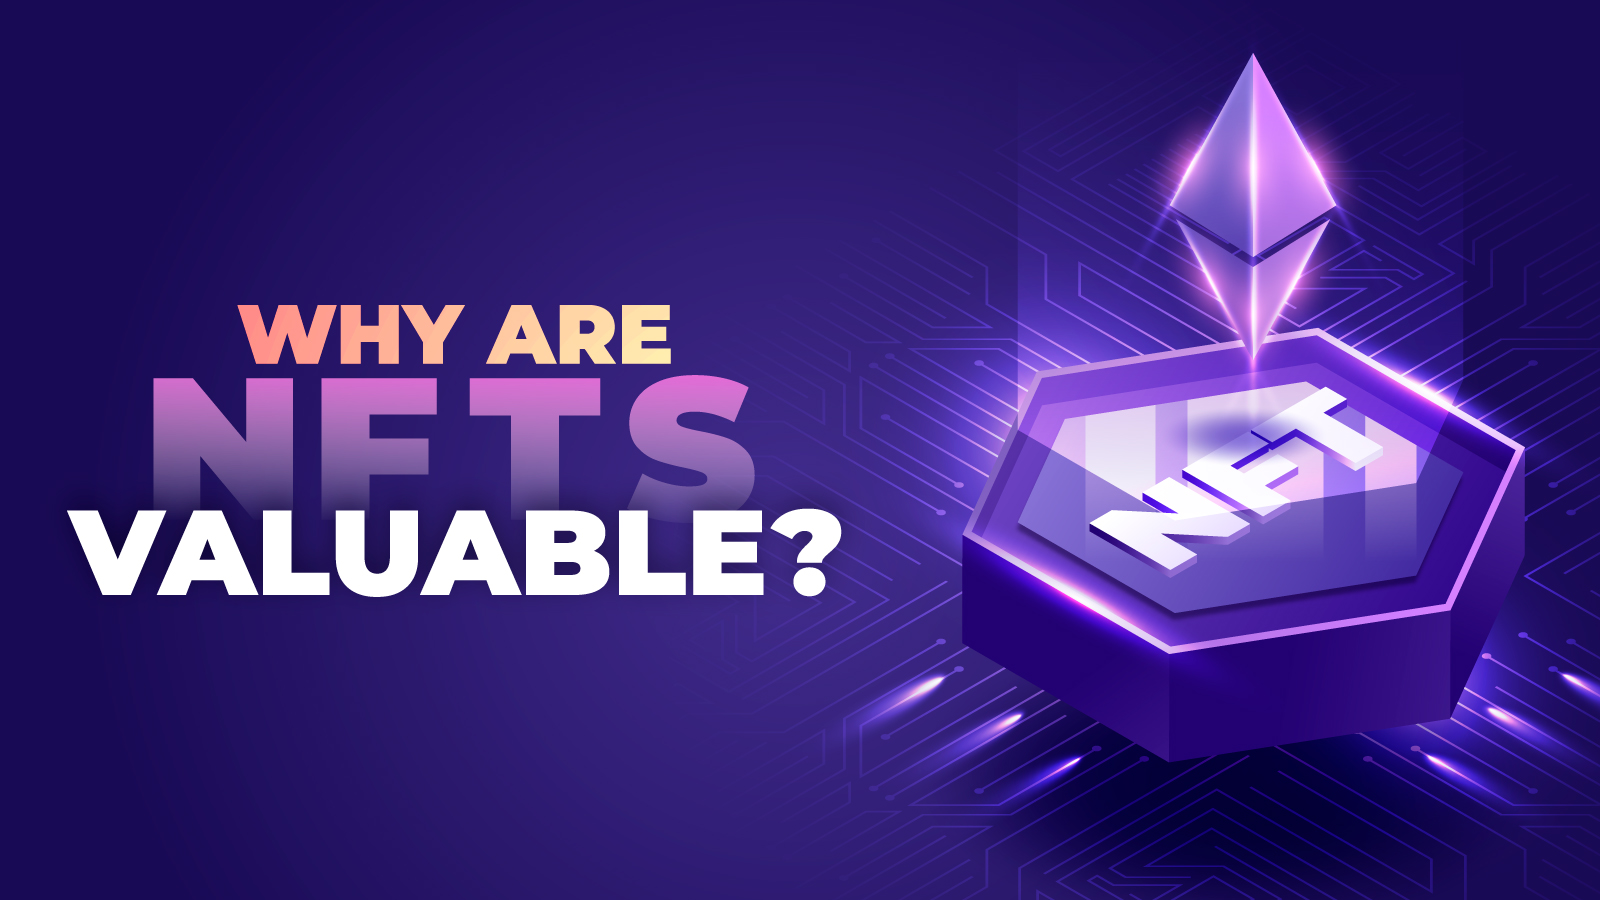 Why are NFTs valuable?